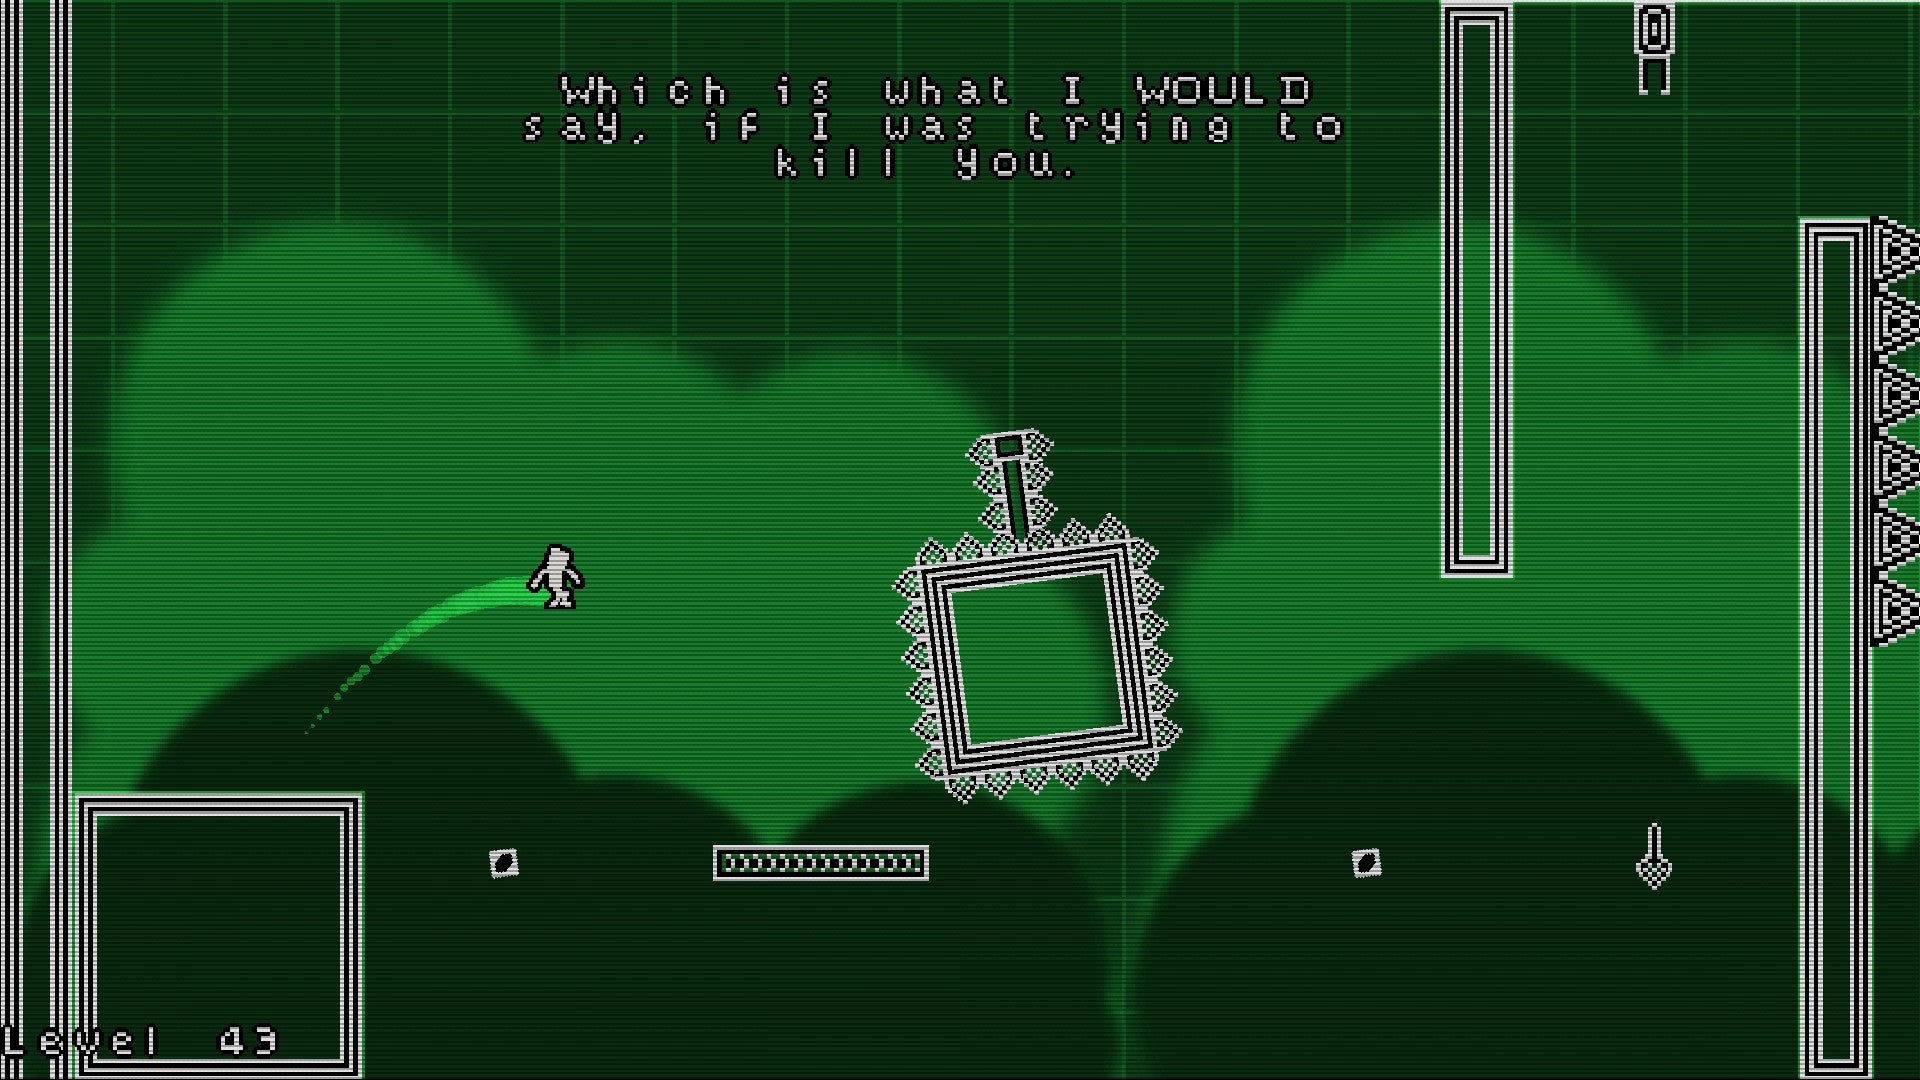 A screenshot from platformer Reiterate showing the player, a little white stickperson, jumping over spiked obstacles and platforms against a green background. At the top, dialogue reads 'Which is what I WOULD say, if I was trying to kill you.'